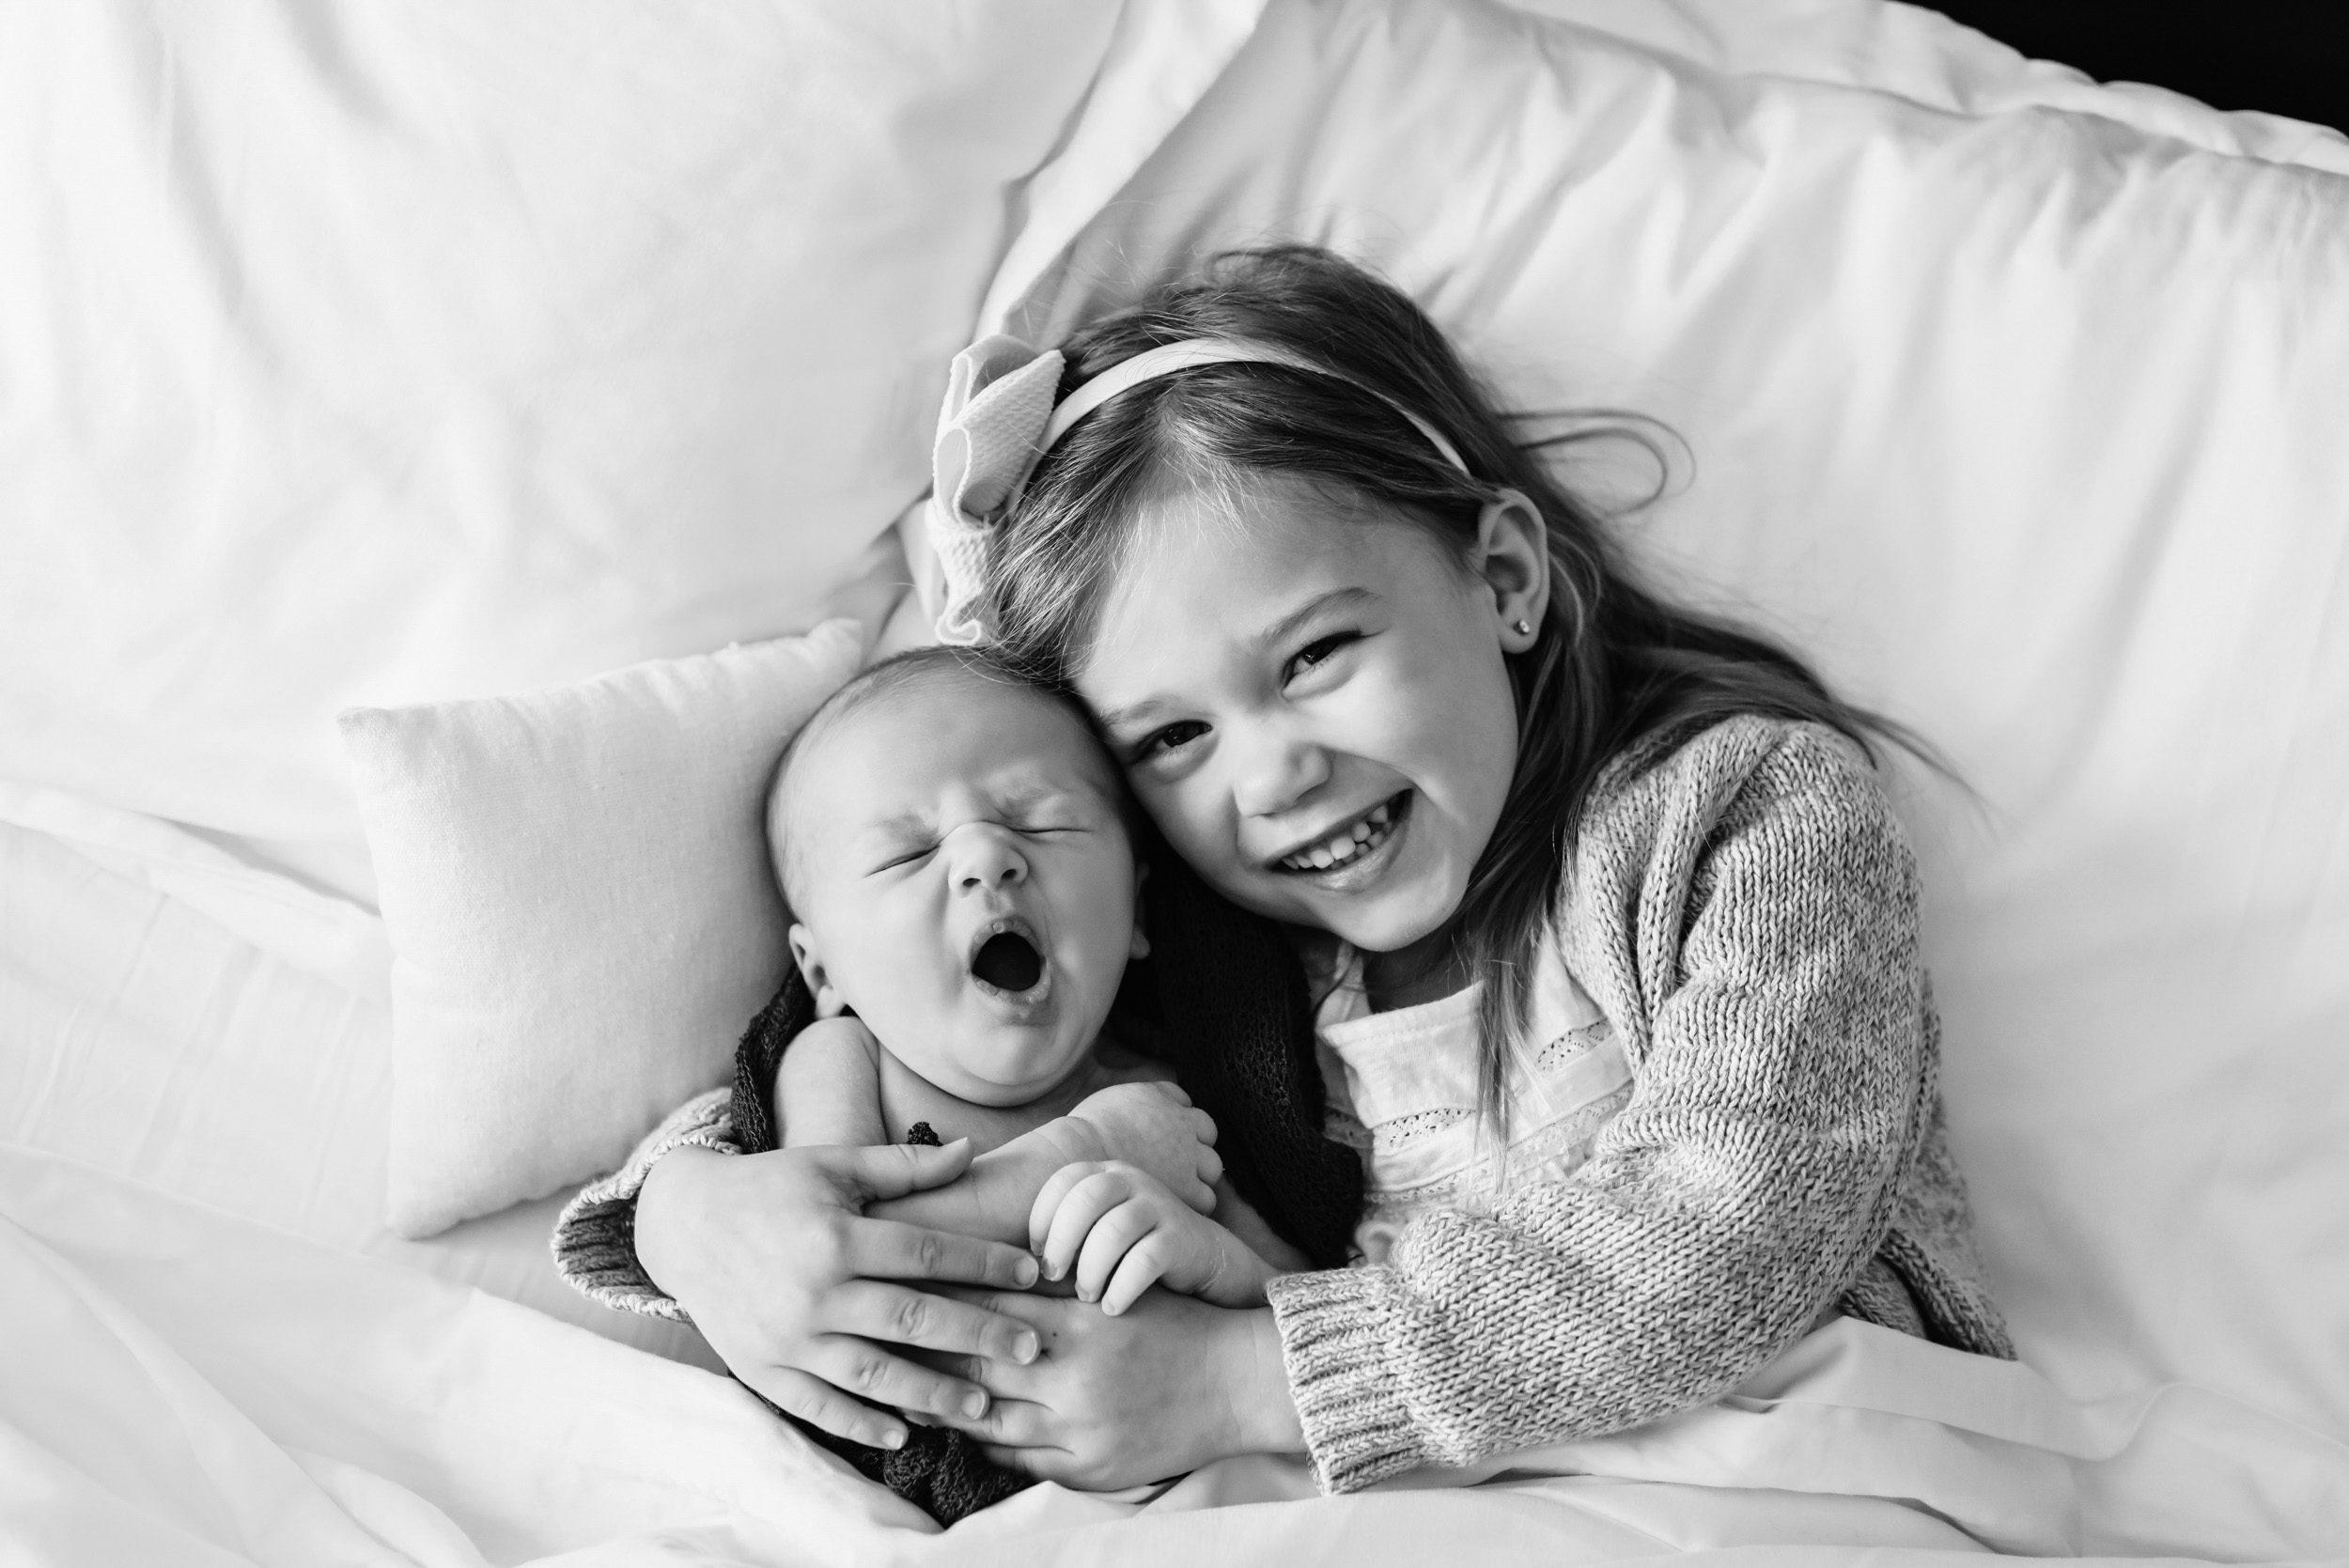 Black and white image of older sibling hugging her newborn baby brother and smiling up at the camera during an in home newborn photo session